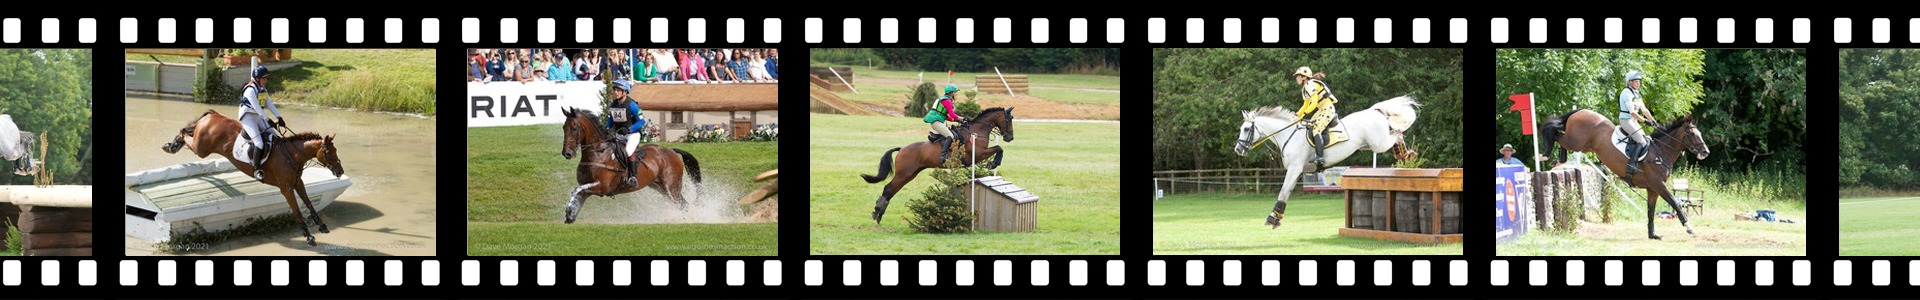 Equines in Action - Eventing Header